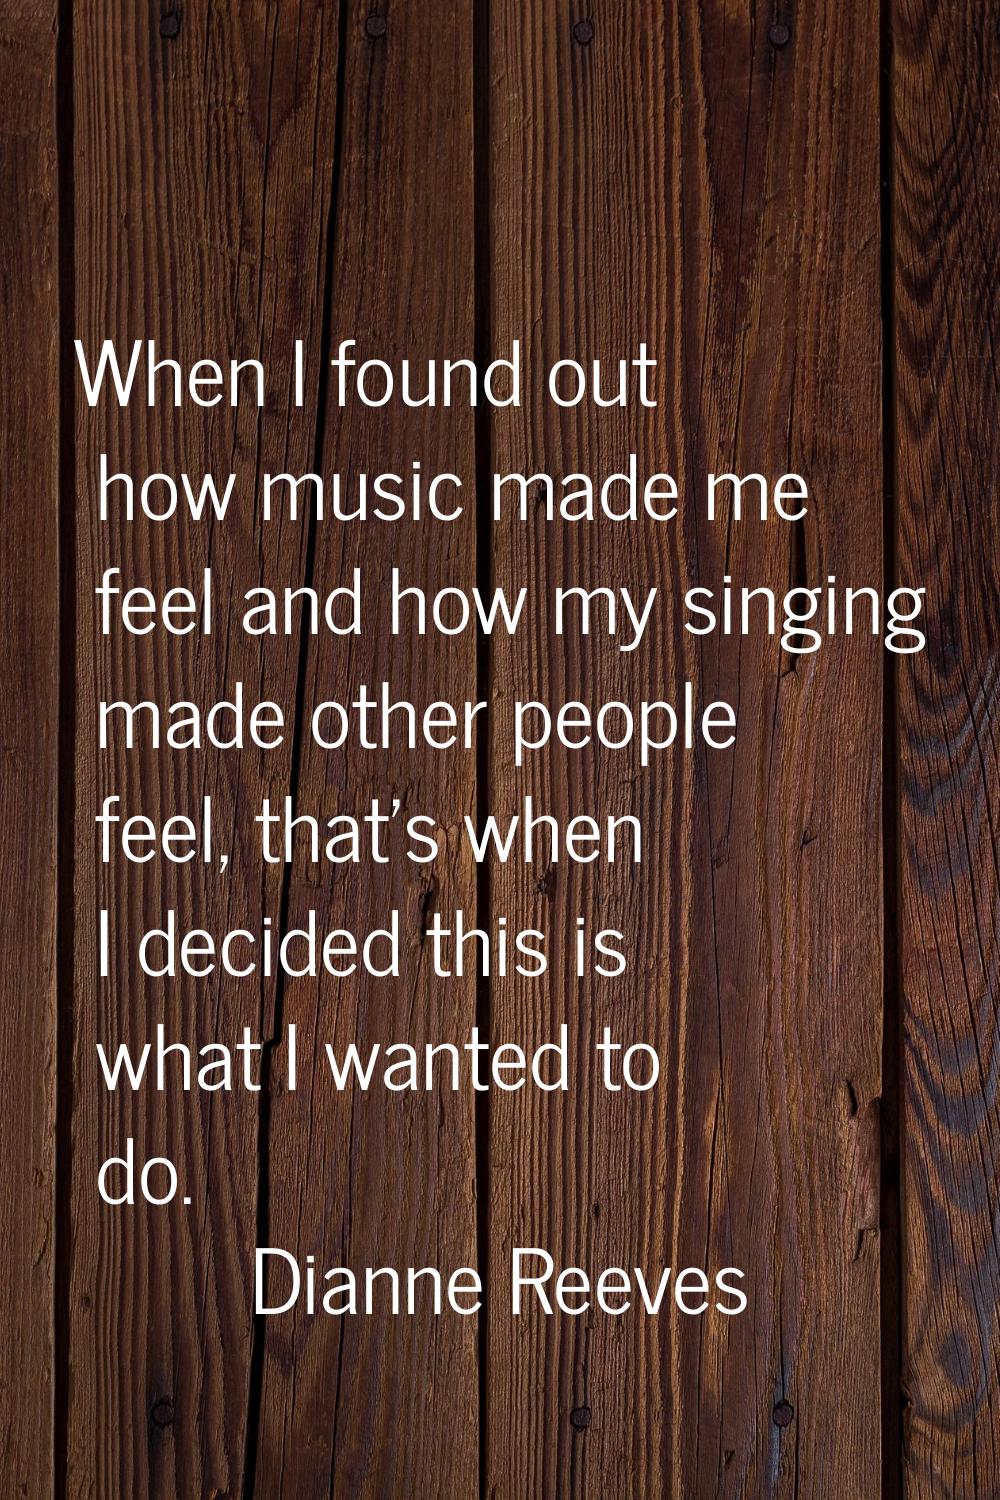 When I found out how music made me feel and how my singing made other people feel, that's when I de